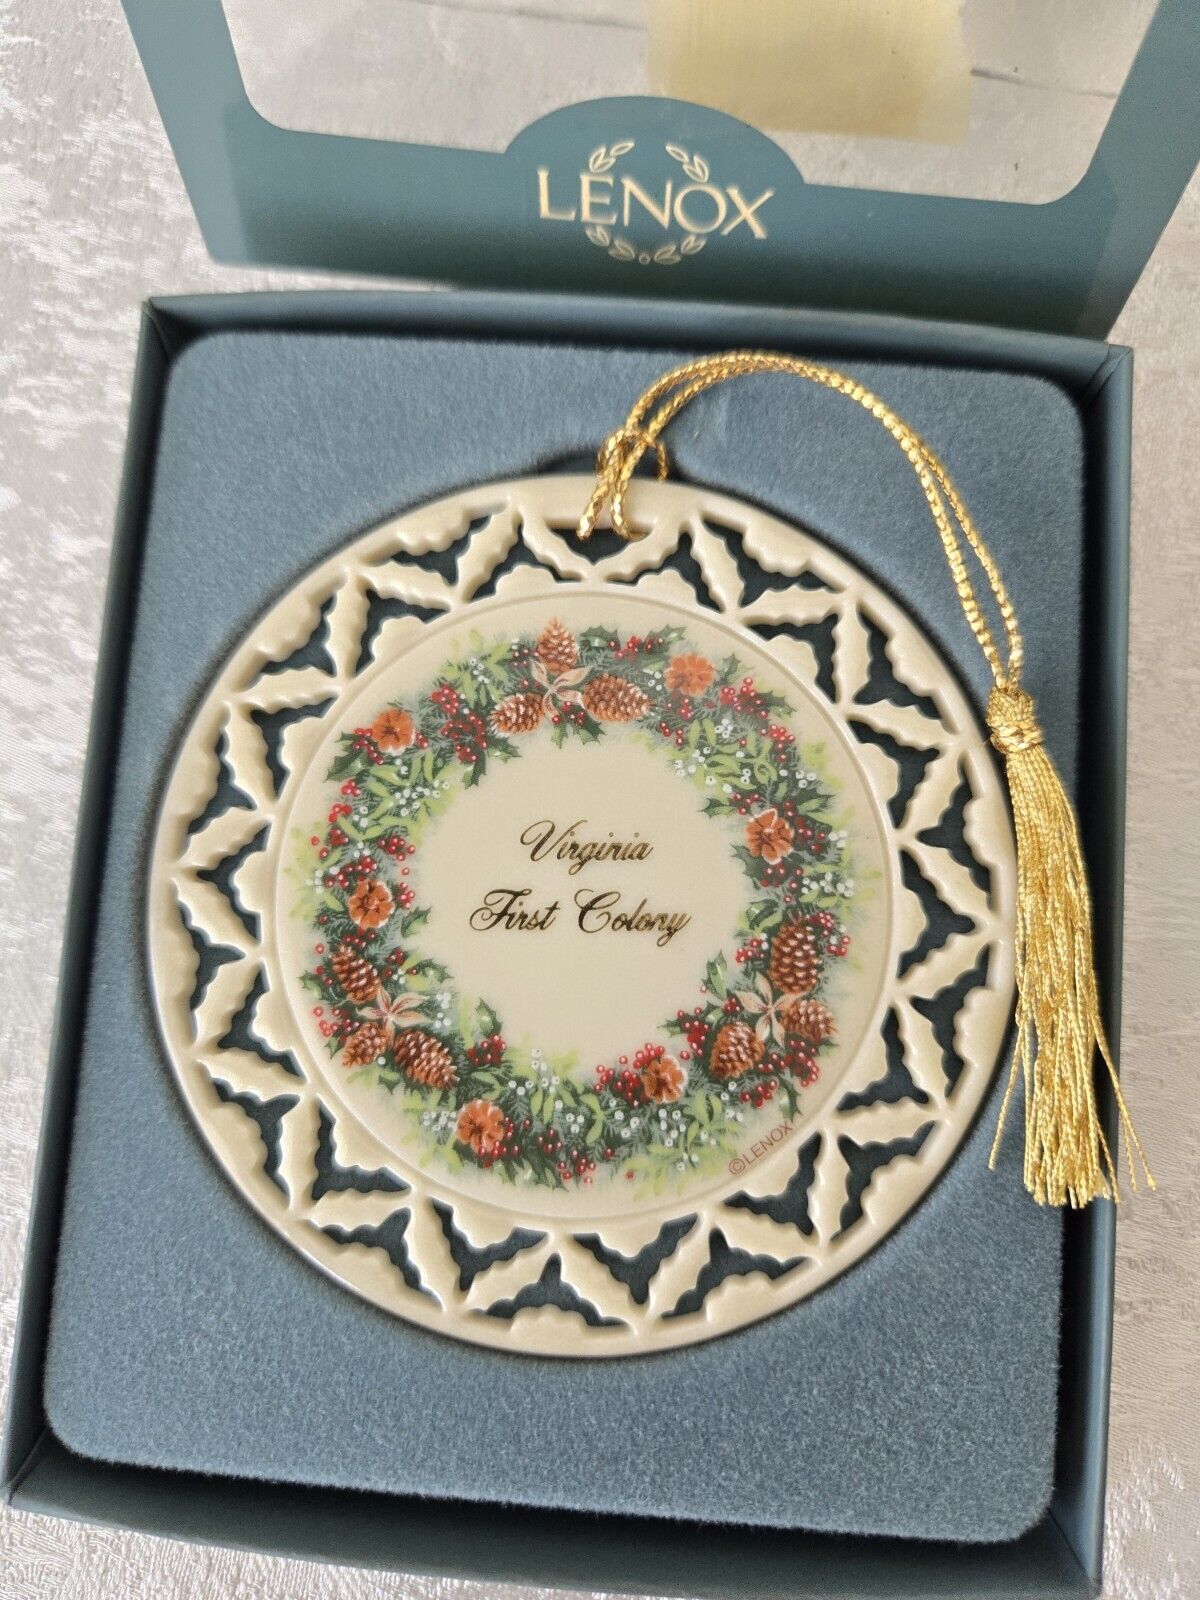 Vintage Lenox Christmas Ornament Virginia First Colony 1997 Wreaths of Colonies 